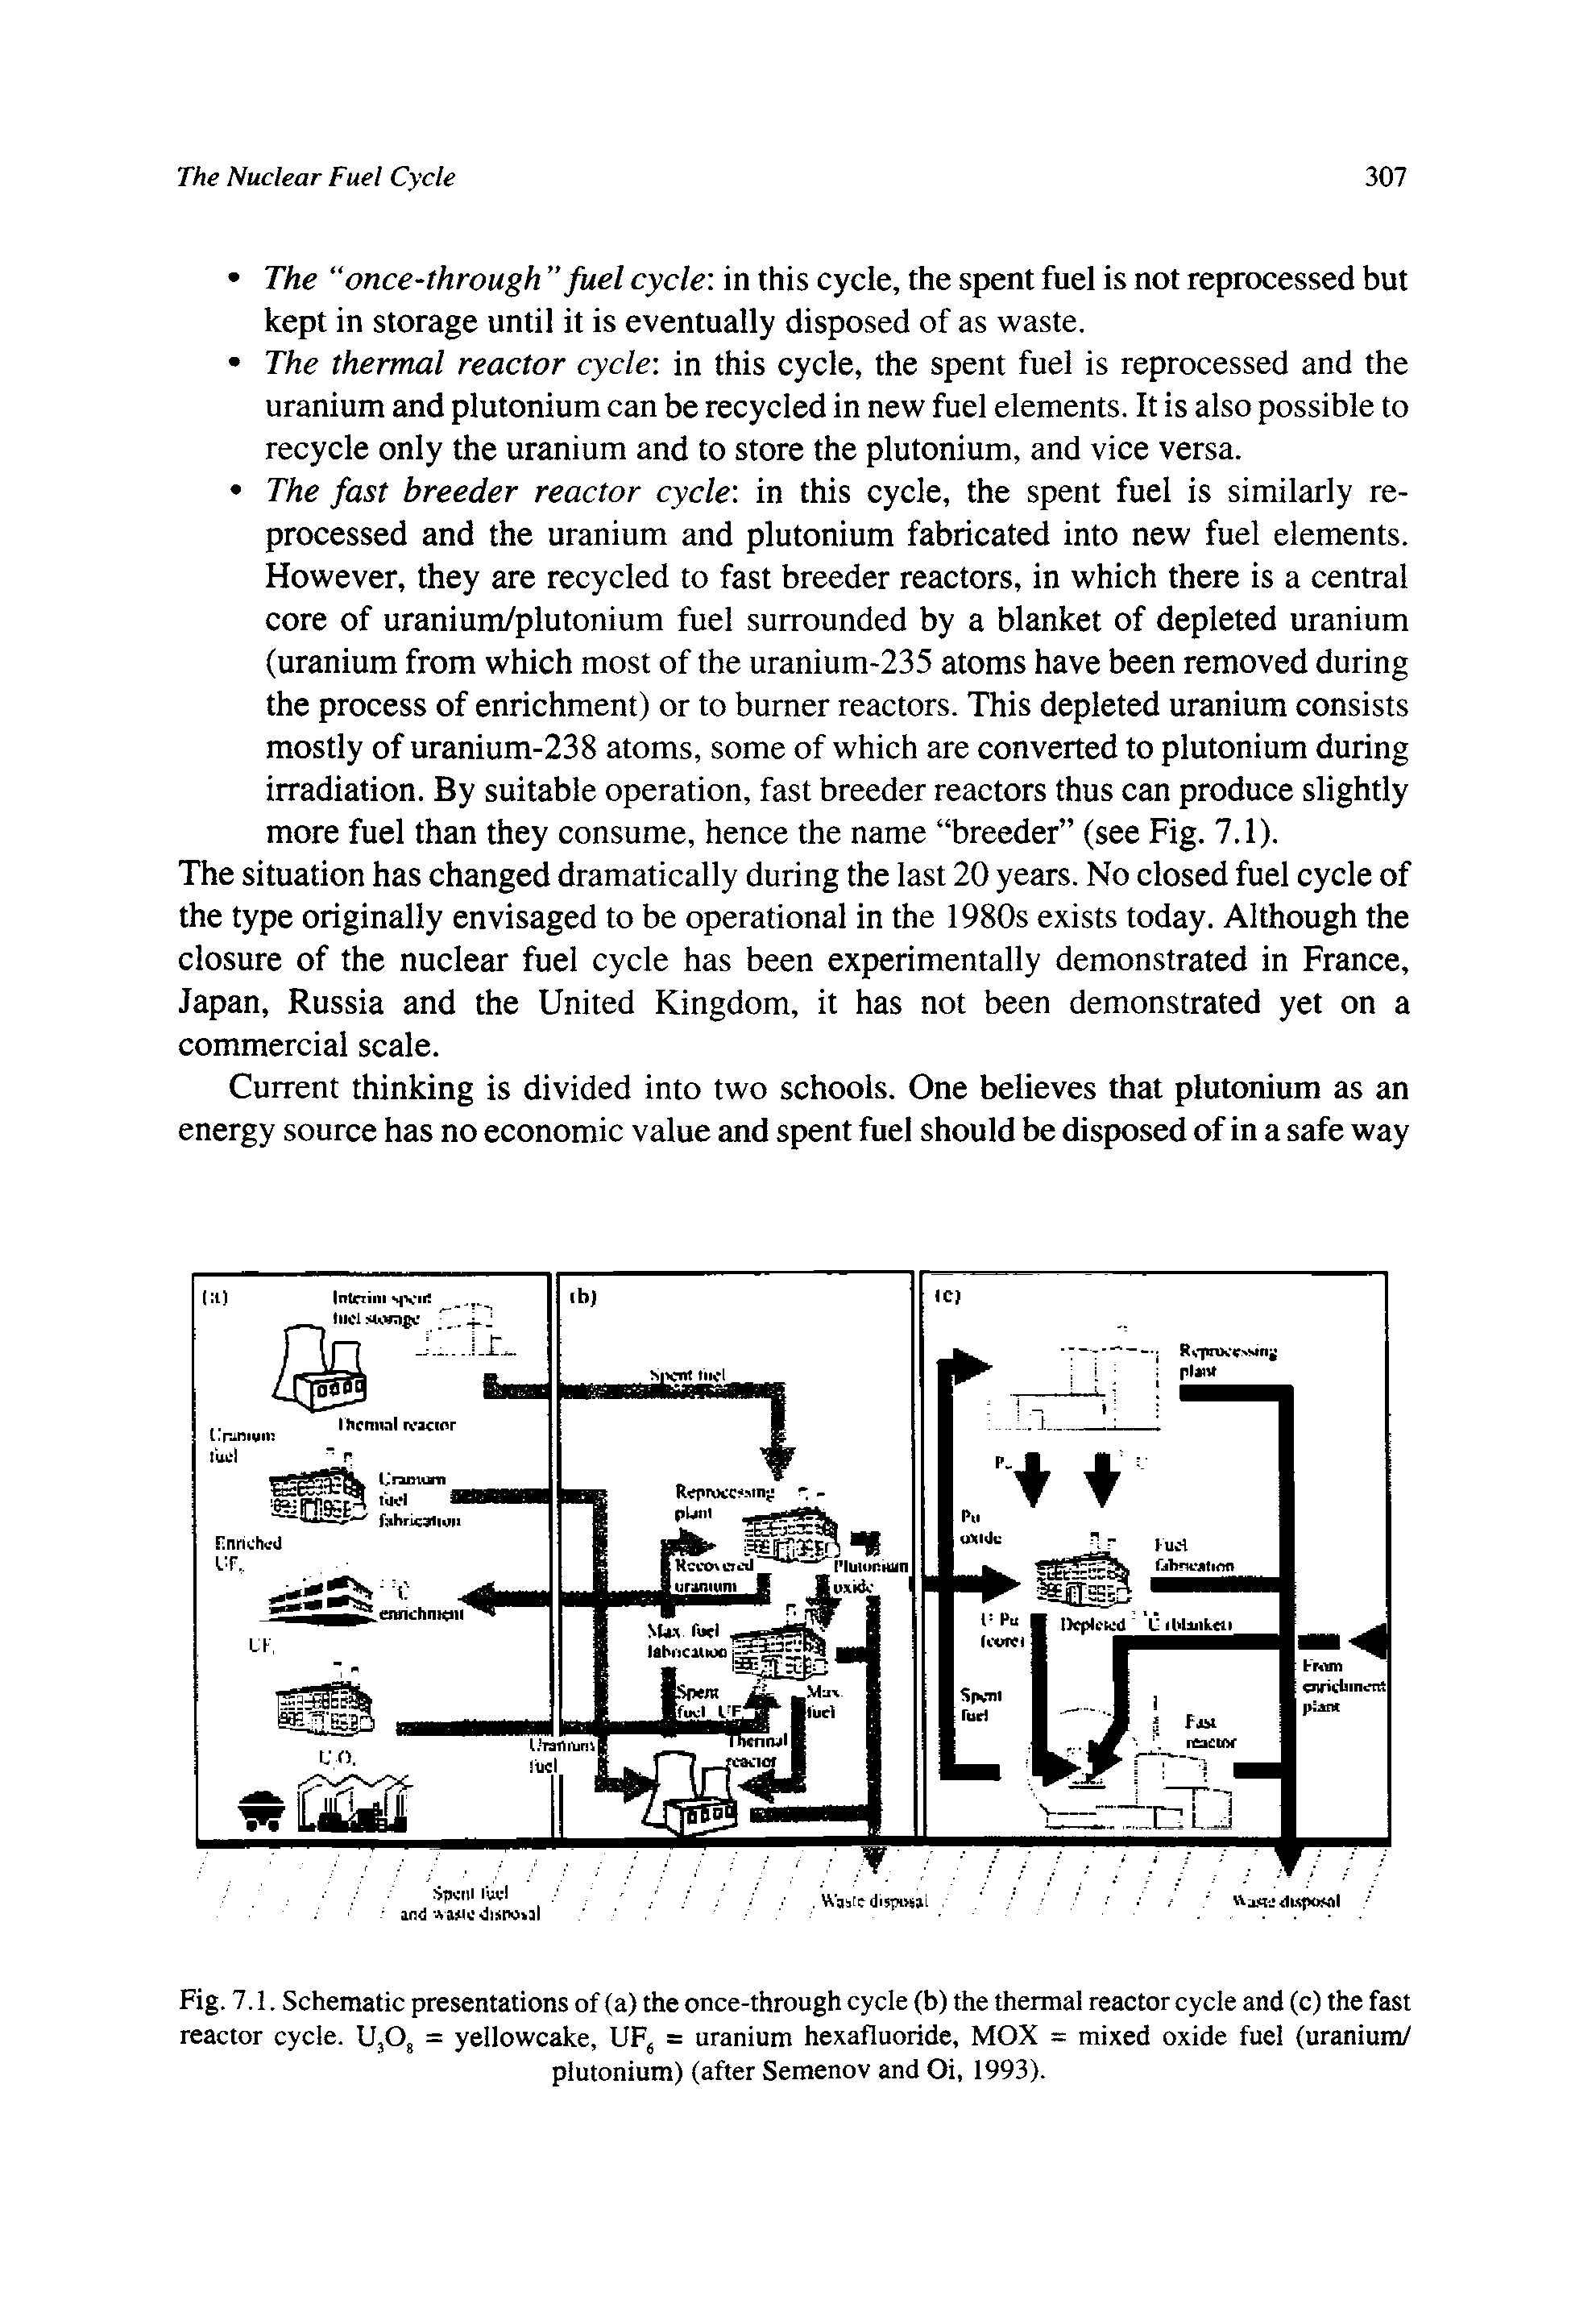 Fig. 7.1. Schematic presentations of (a) the once-through cycle (b) the thermal reactor cycle and (c) the fast reactor cycle. UjO, = yellowcake, UF = uranium hexafluoride, MOX = mixed oxide fuel (uranium/...